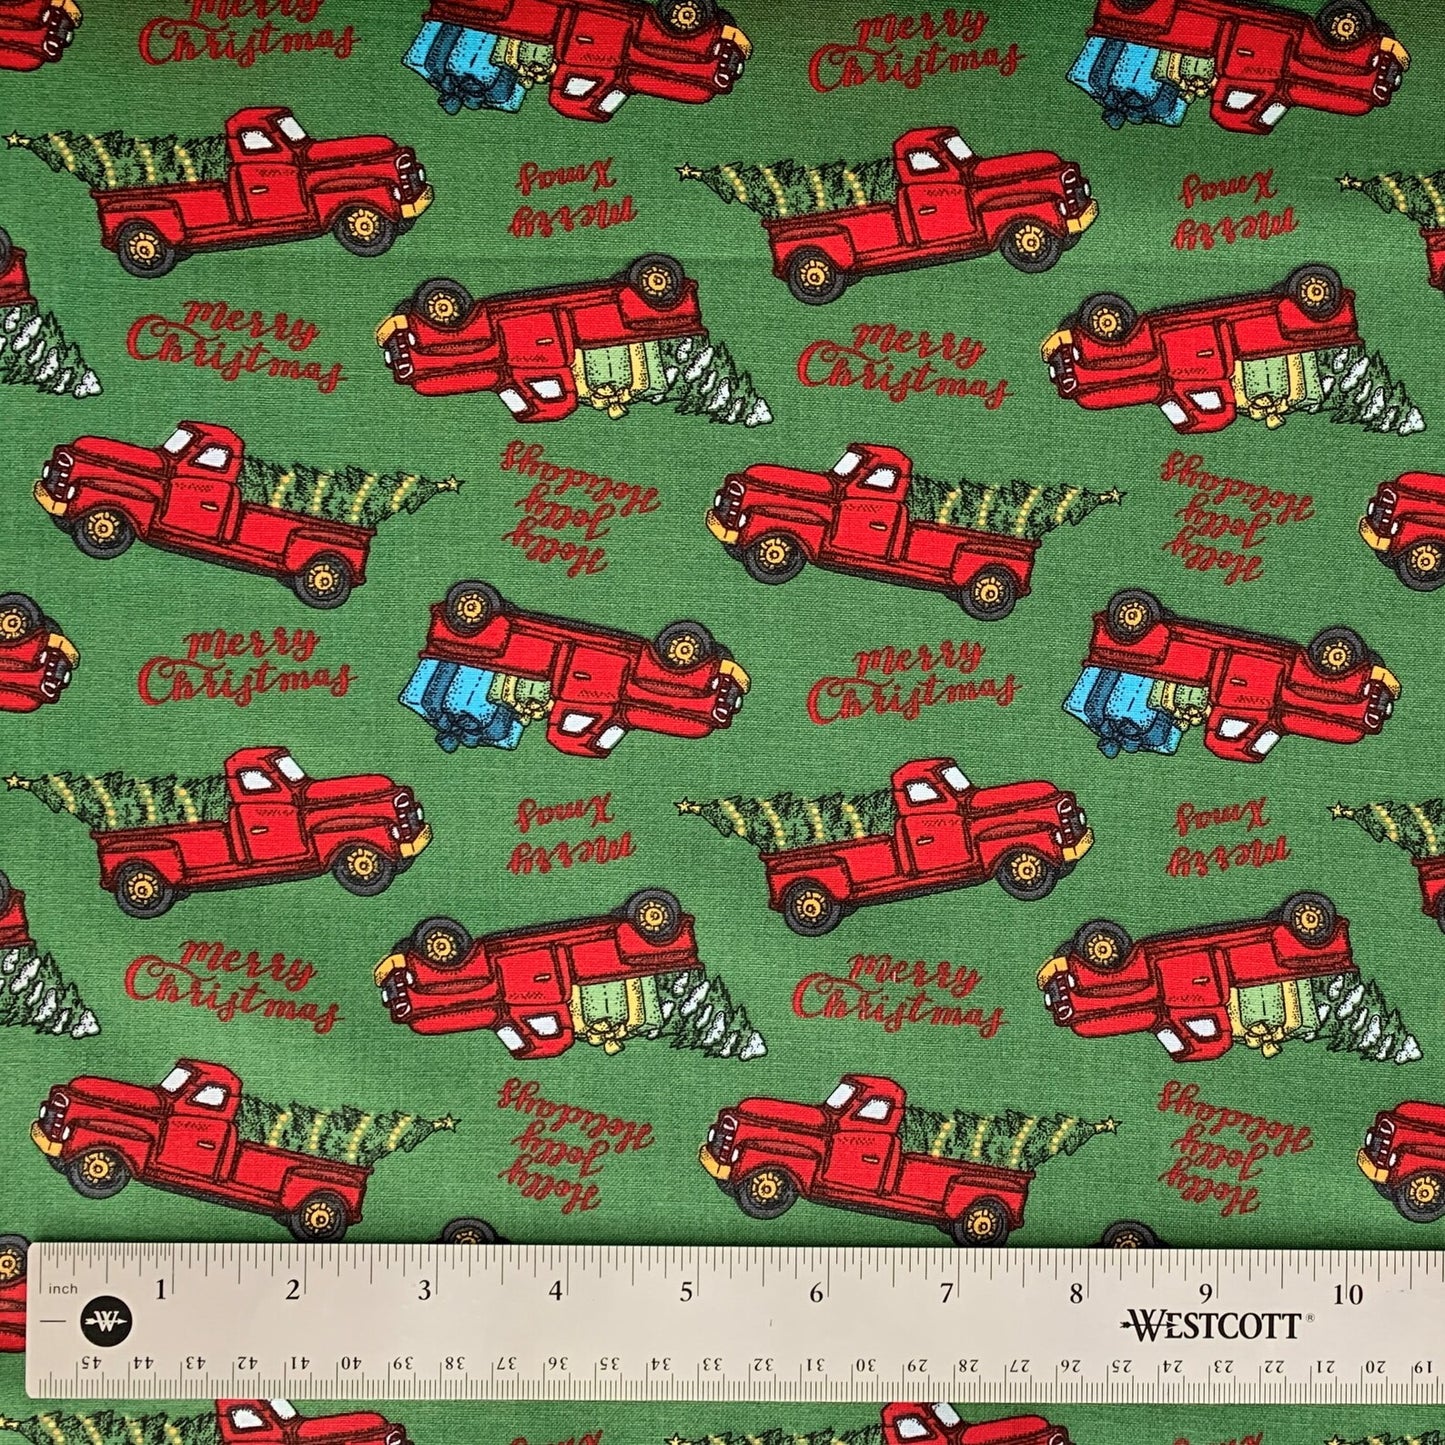 45 x 36 Christmas Red Truck Gifts Trees on Green 100% Cotton Fabric